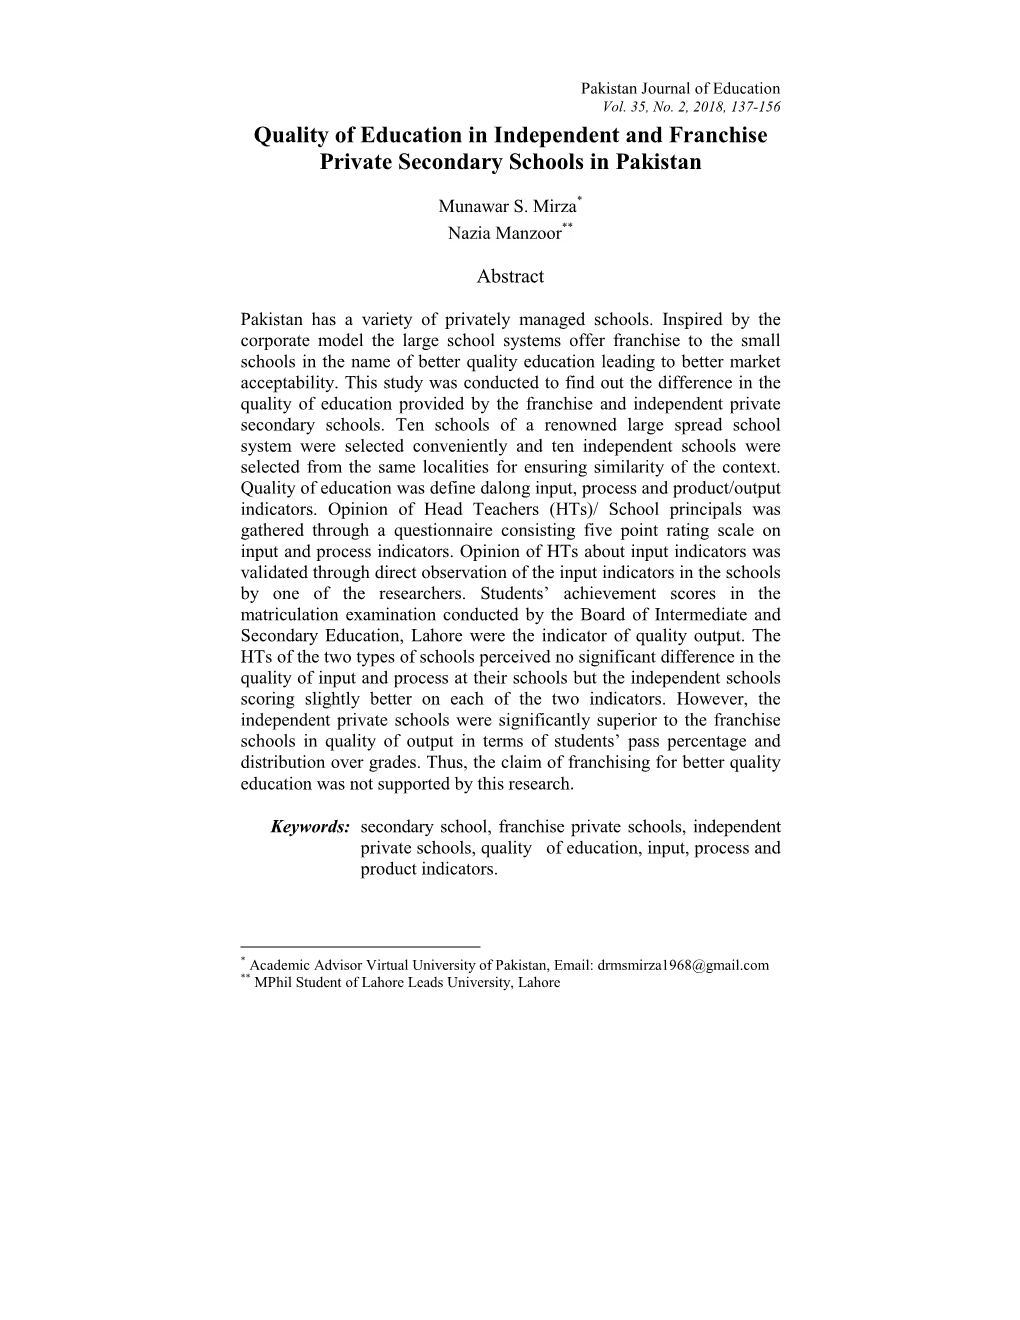 Quality of Education in Independent and Franchise Private Secondary Schools in Pakistan